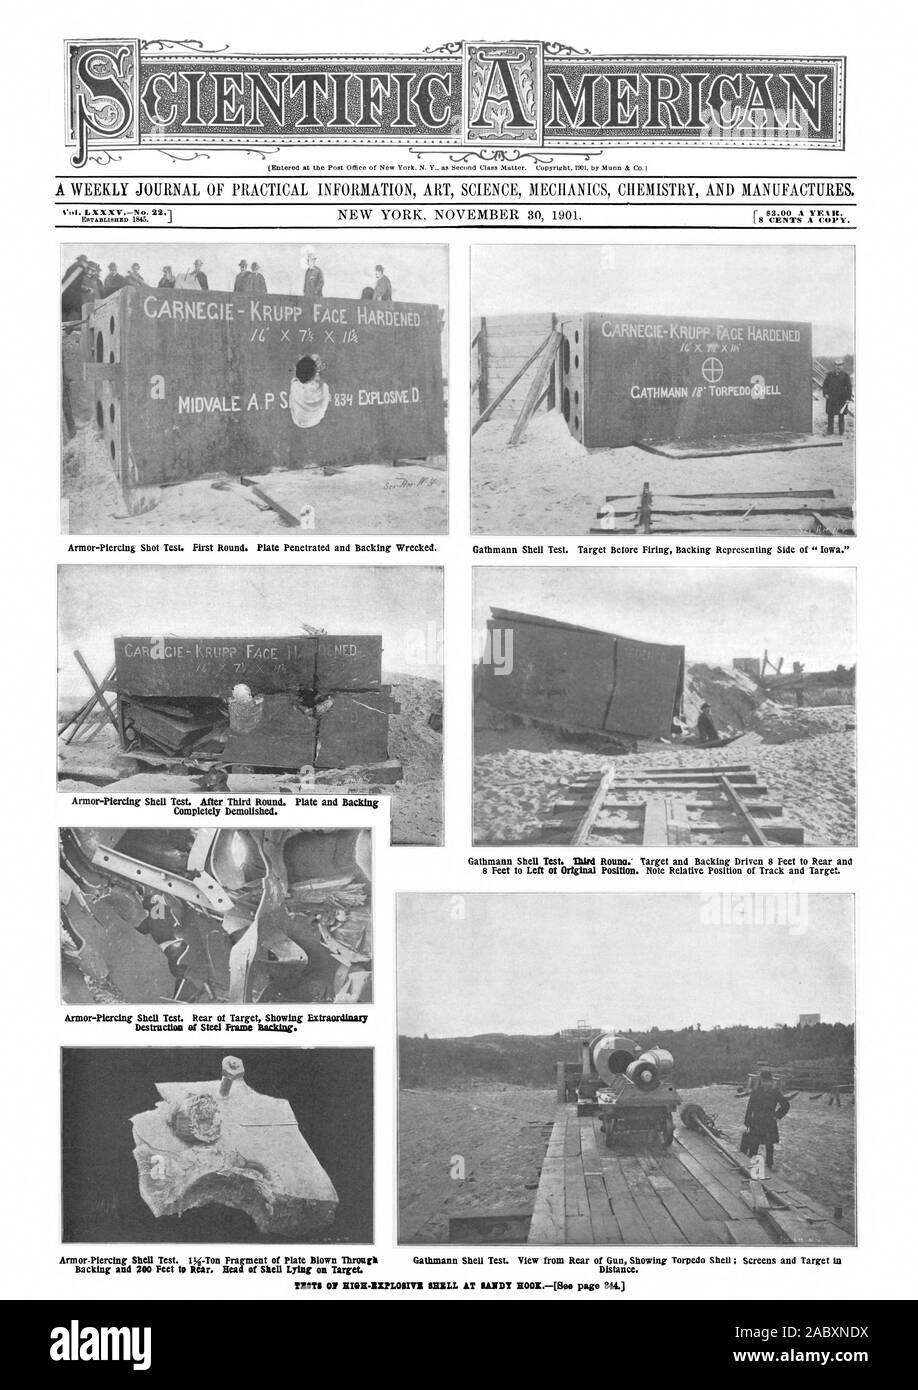 Gathmann Shell Test. View from Rear of Gun Showing Torpedo shell; Screens and Target in Backing and 200 Feet to Rear. Read of Shell Lying on Target. Distance. TESTI 01 III9-3IPLOSIVI MILL AT BANDY 00K[Bee page 844.) Armor-Piercing Shell Test. After Third Round. Plate and Backing Completely Demolished. Armor-Piercing Shell Test. Rear of Target Showing Extraordinary Destruction of Steel Frame Bar.king. Gathmann Shell Test. Third Rouna. Target and Backing Driven 8 Feet to Rear and 8 Feet to Left ot Original Position. Note Relative Position of Track and Target., scientific american, 1901-11-30 Stock Photo